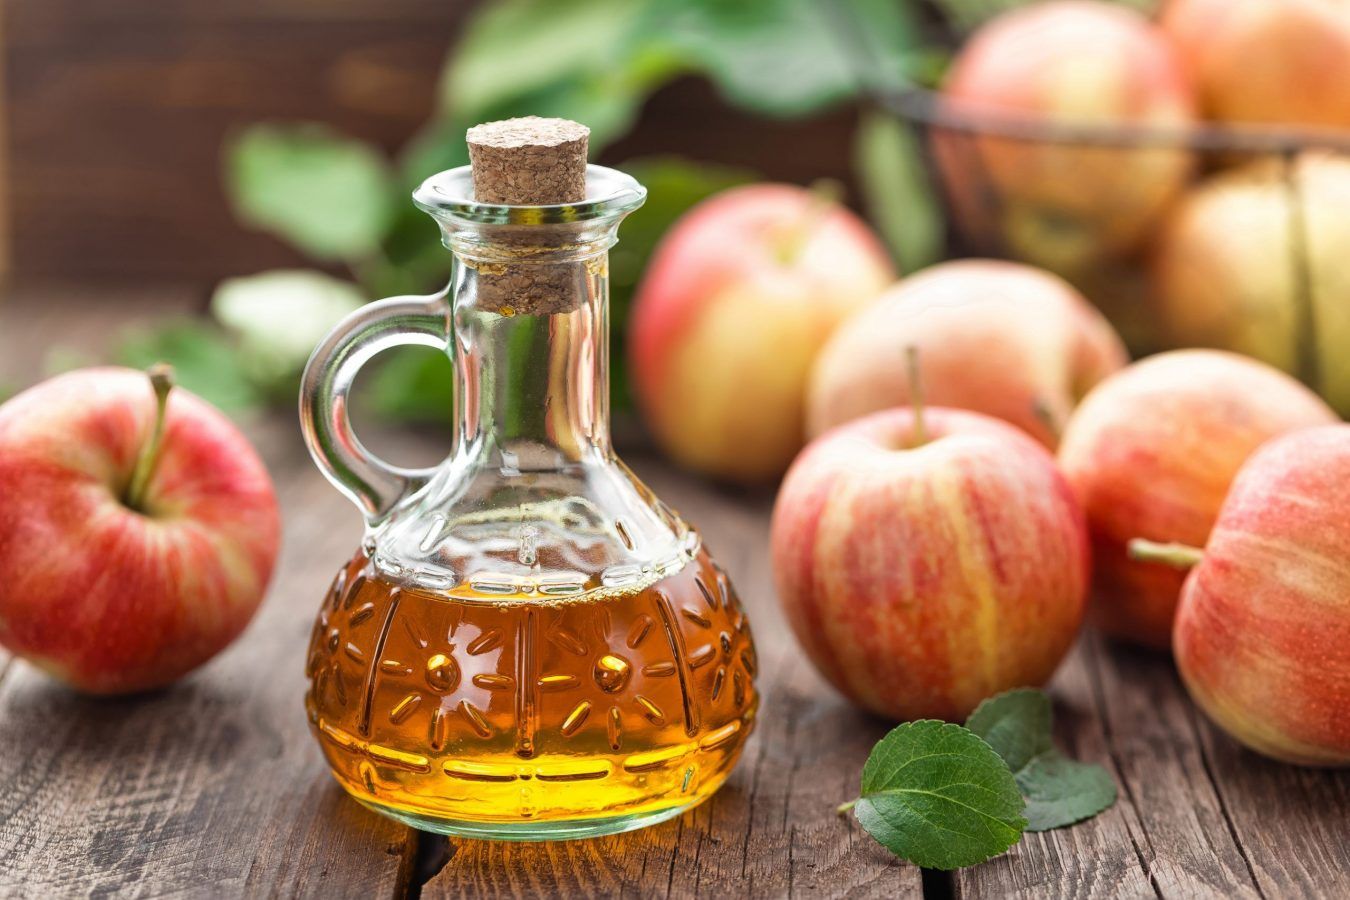 Apple cider vinegar: The benefits and uses of the beauty elixir on skin